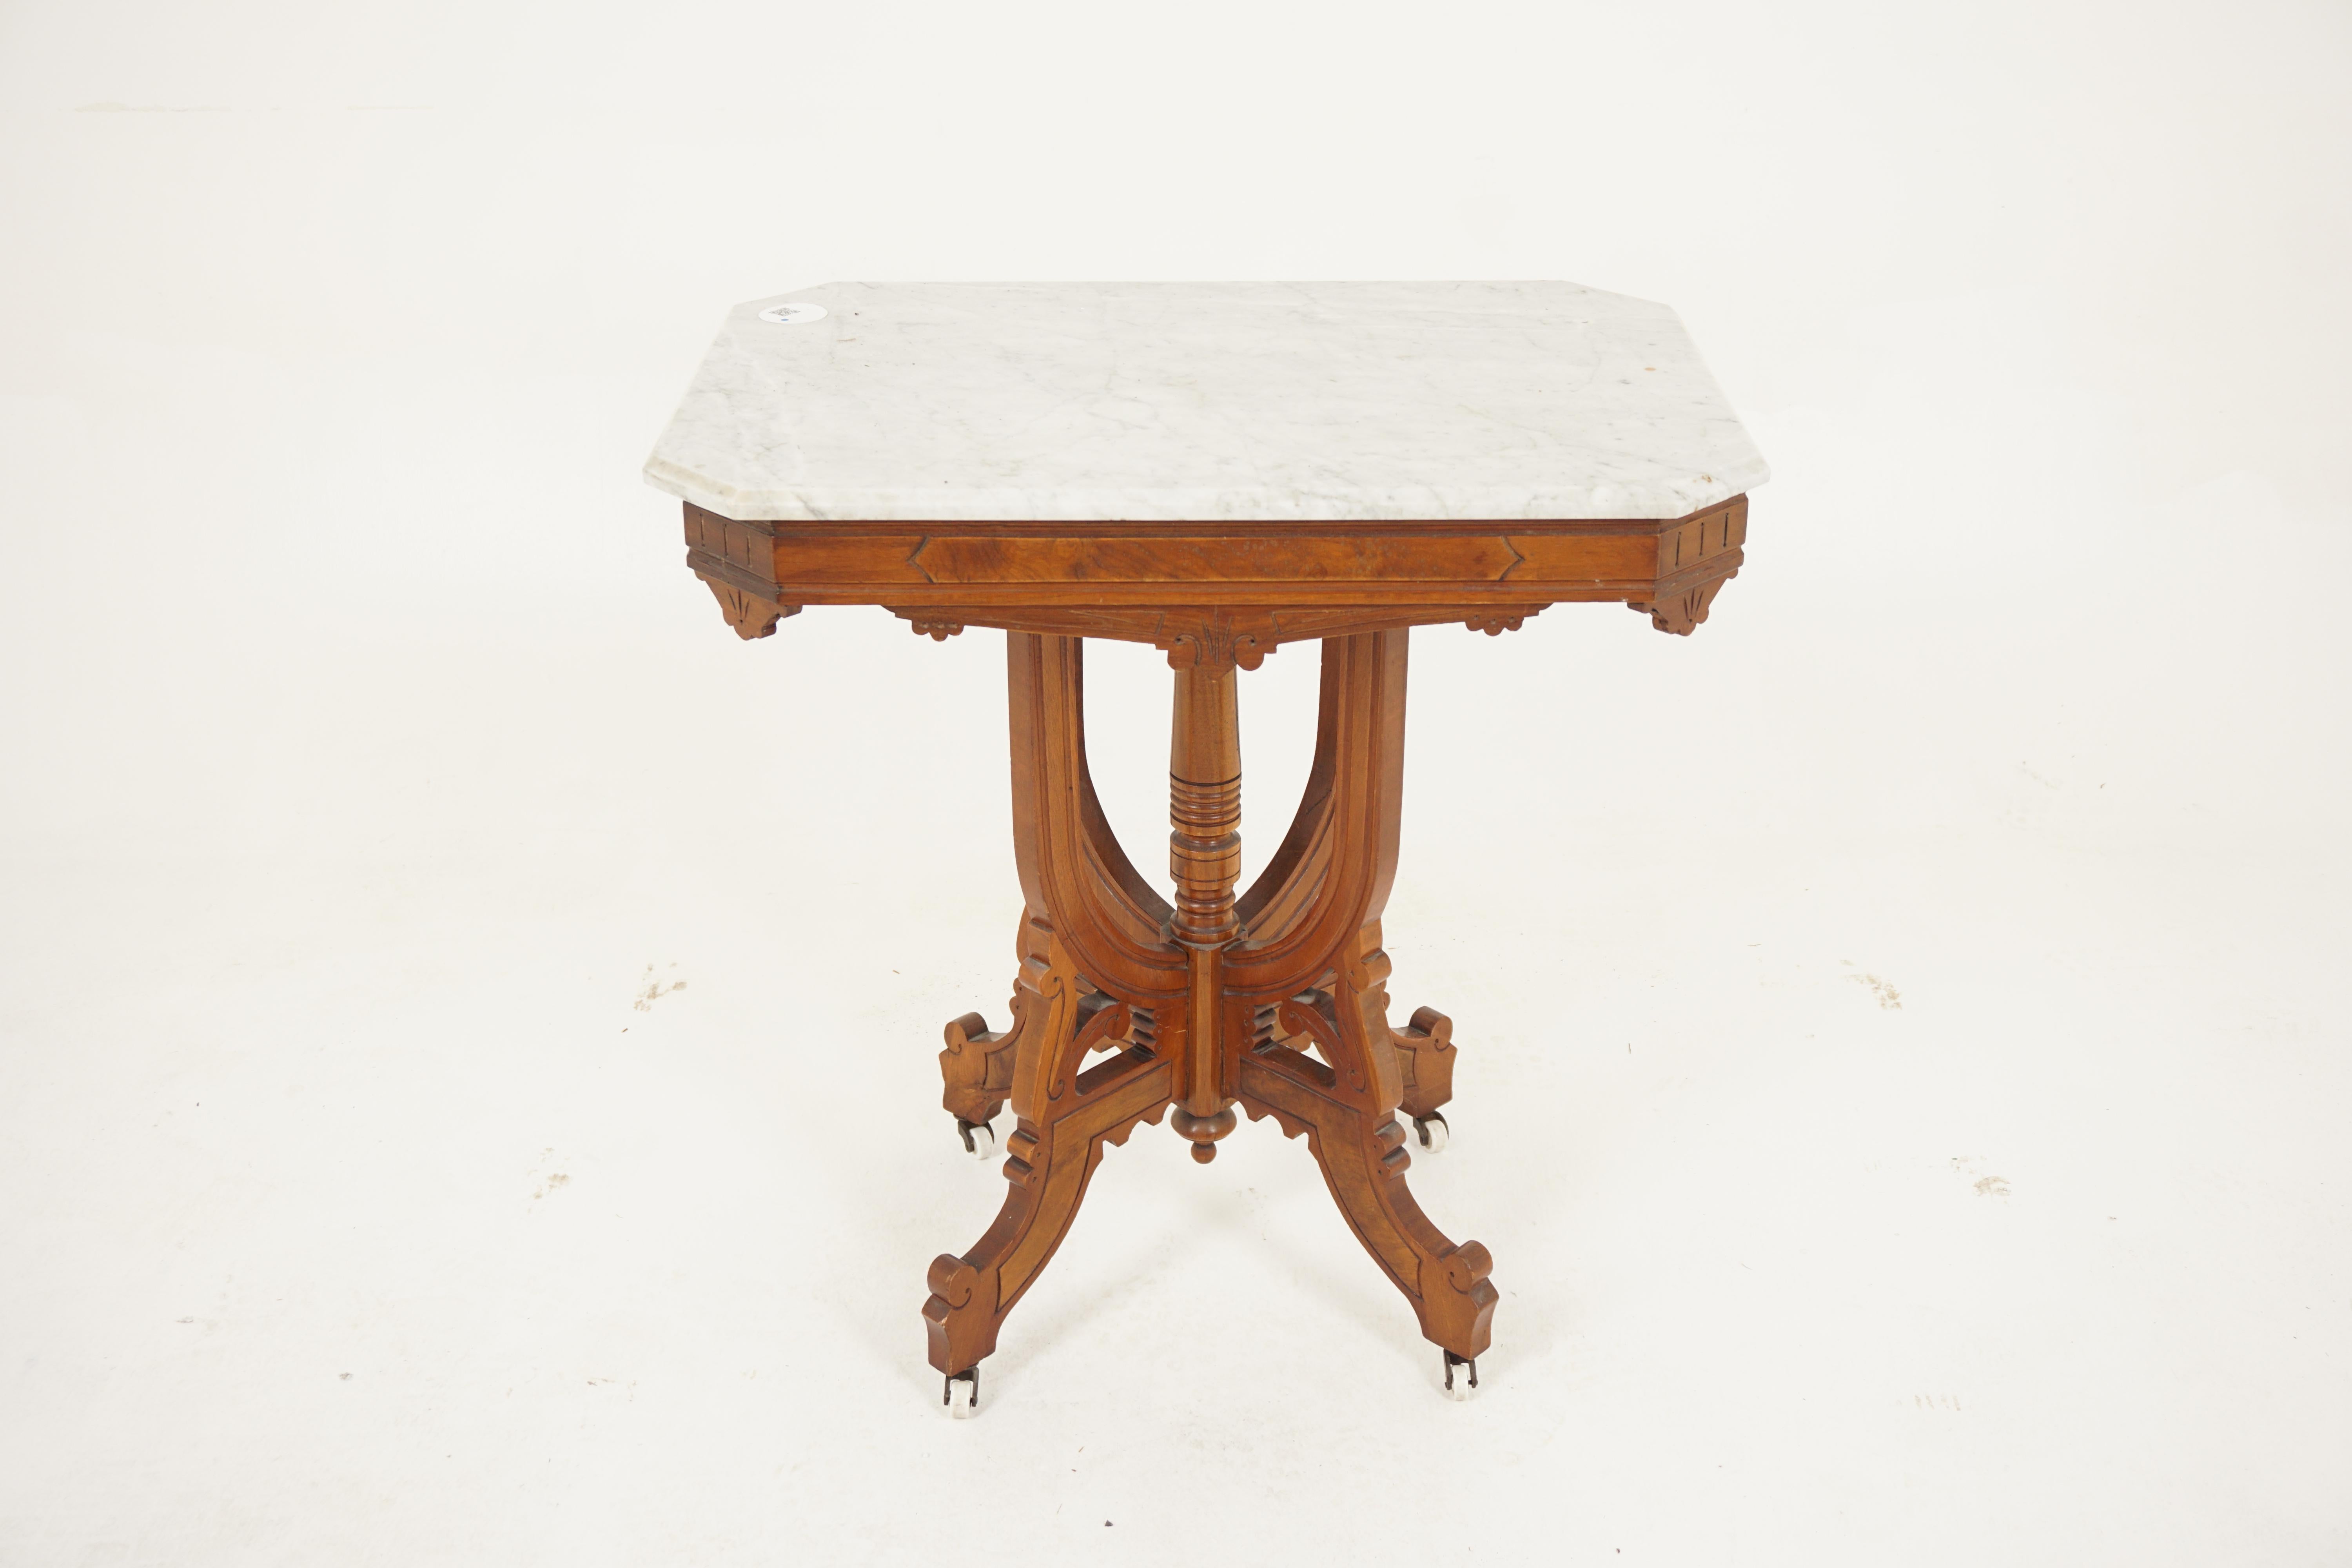 Antique Walnut Marble Top East Lake Hall, parlour table, American 1880, H907

American 1880
Solid Walnut 
Original Finish 
White marble top with canted corners 
Sitting on a carved walnut base 
With shape skirt 
For shaped supports with a